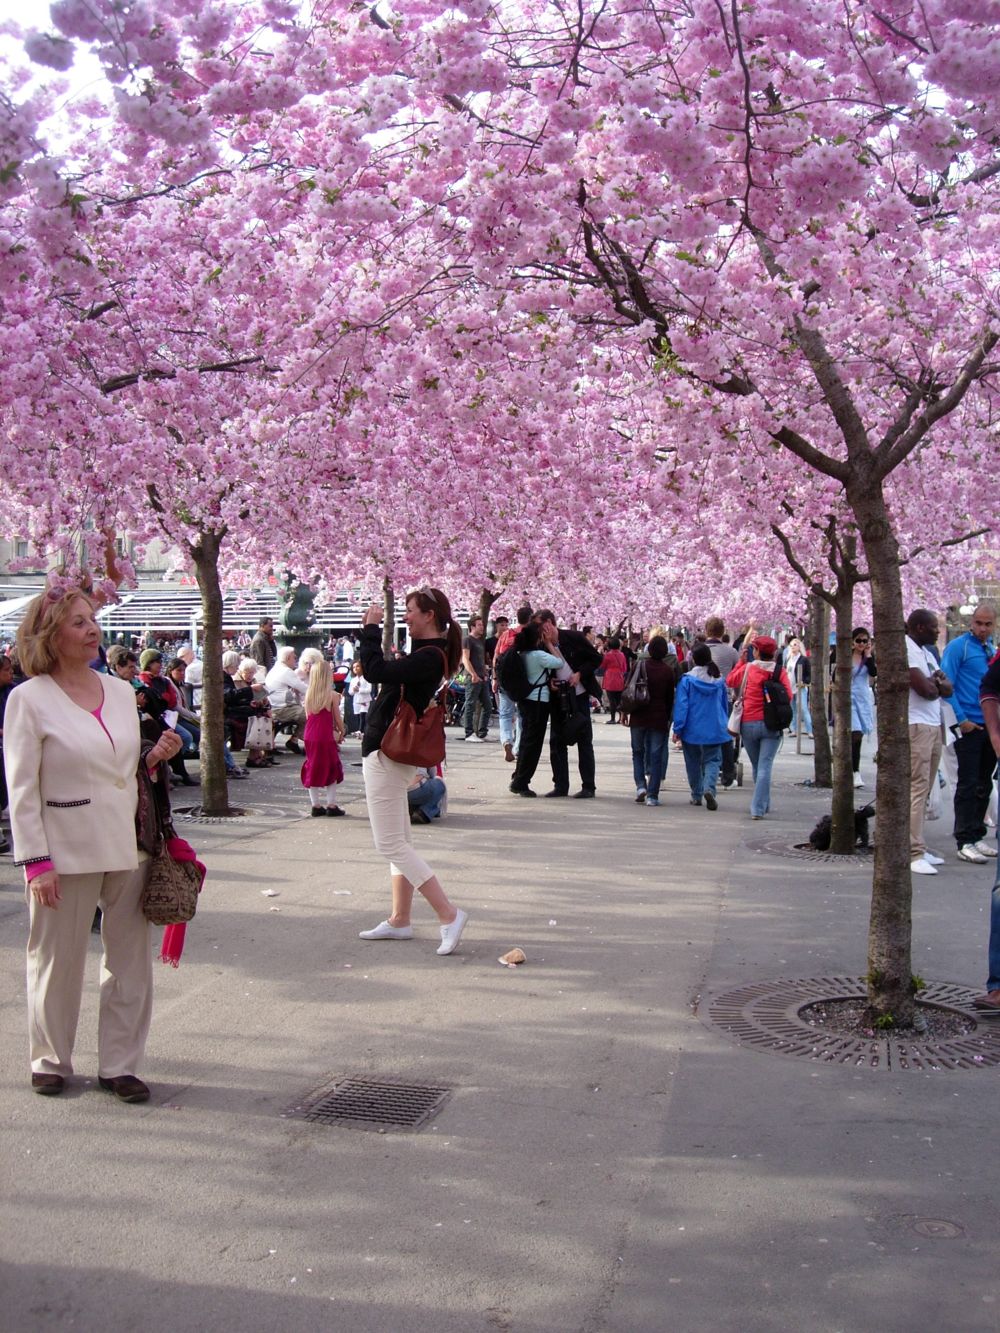 The cherry blossoms at Kungstradarden